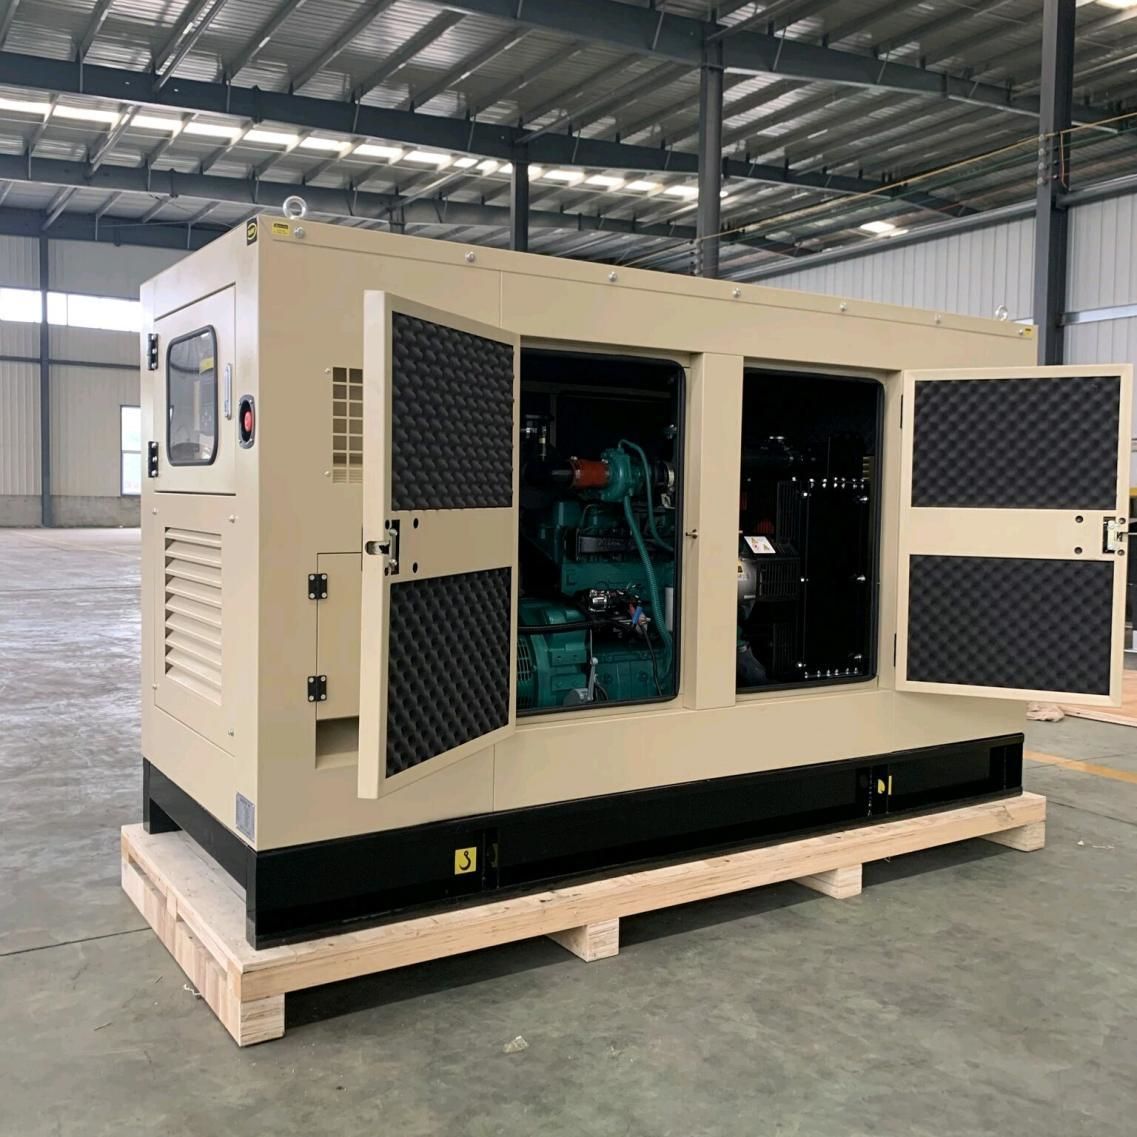 Diesel generator factory Beijing Woda power provides reliable quality at cost price